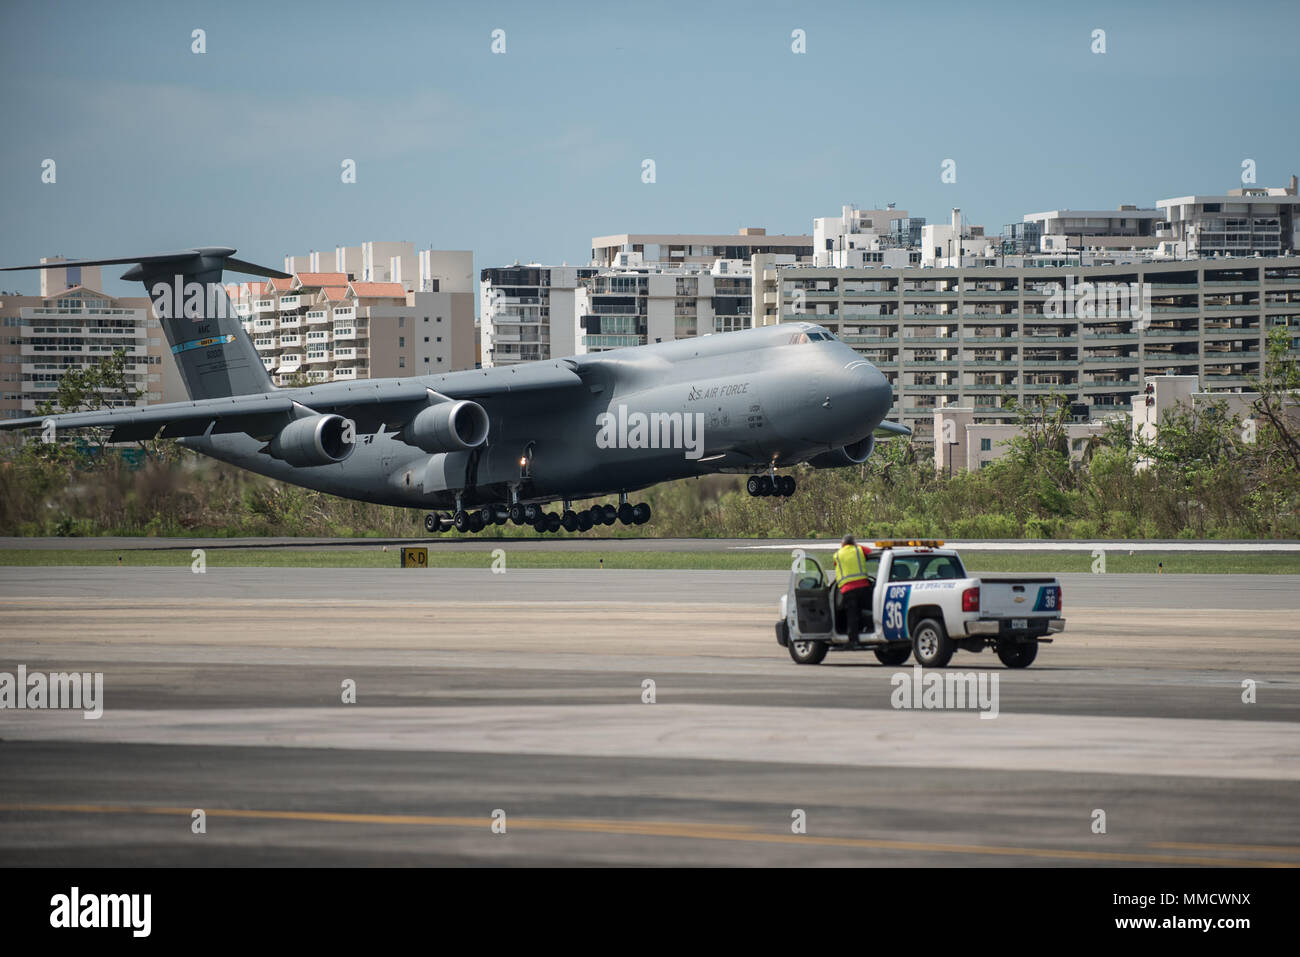 A U.S. Air Force C-5 Galaxy loaded with humanitarian aid lands at Luis Muñoz Marín International Airport in San Juan on Oct. 5, 2017. The cargo will be downloaded and staged for distribution by Airmen from the Kentucky Air Guard’s 123rd Contingency Response Group as part of Hurricane Maria recovery efforts. (U.S. Air National Guard photo by Lt. Col. Dale Greer) Stock Photo